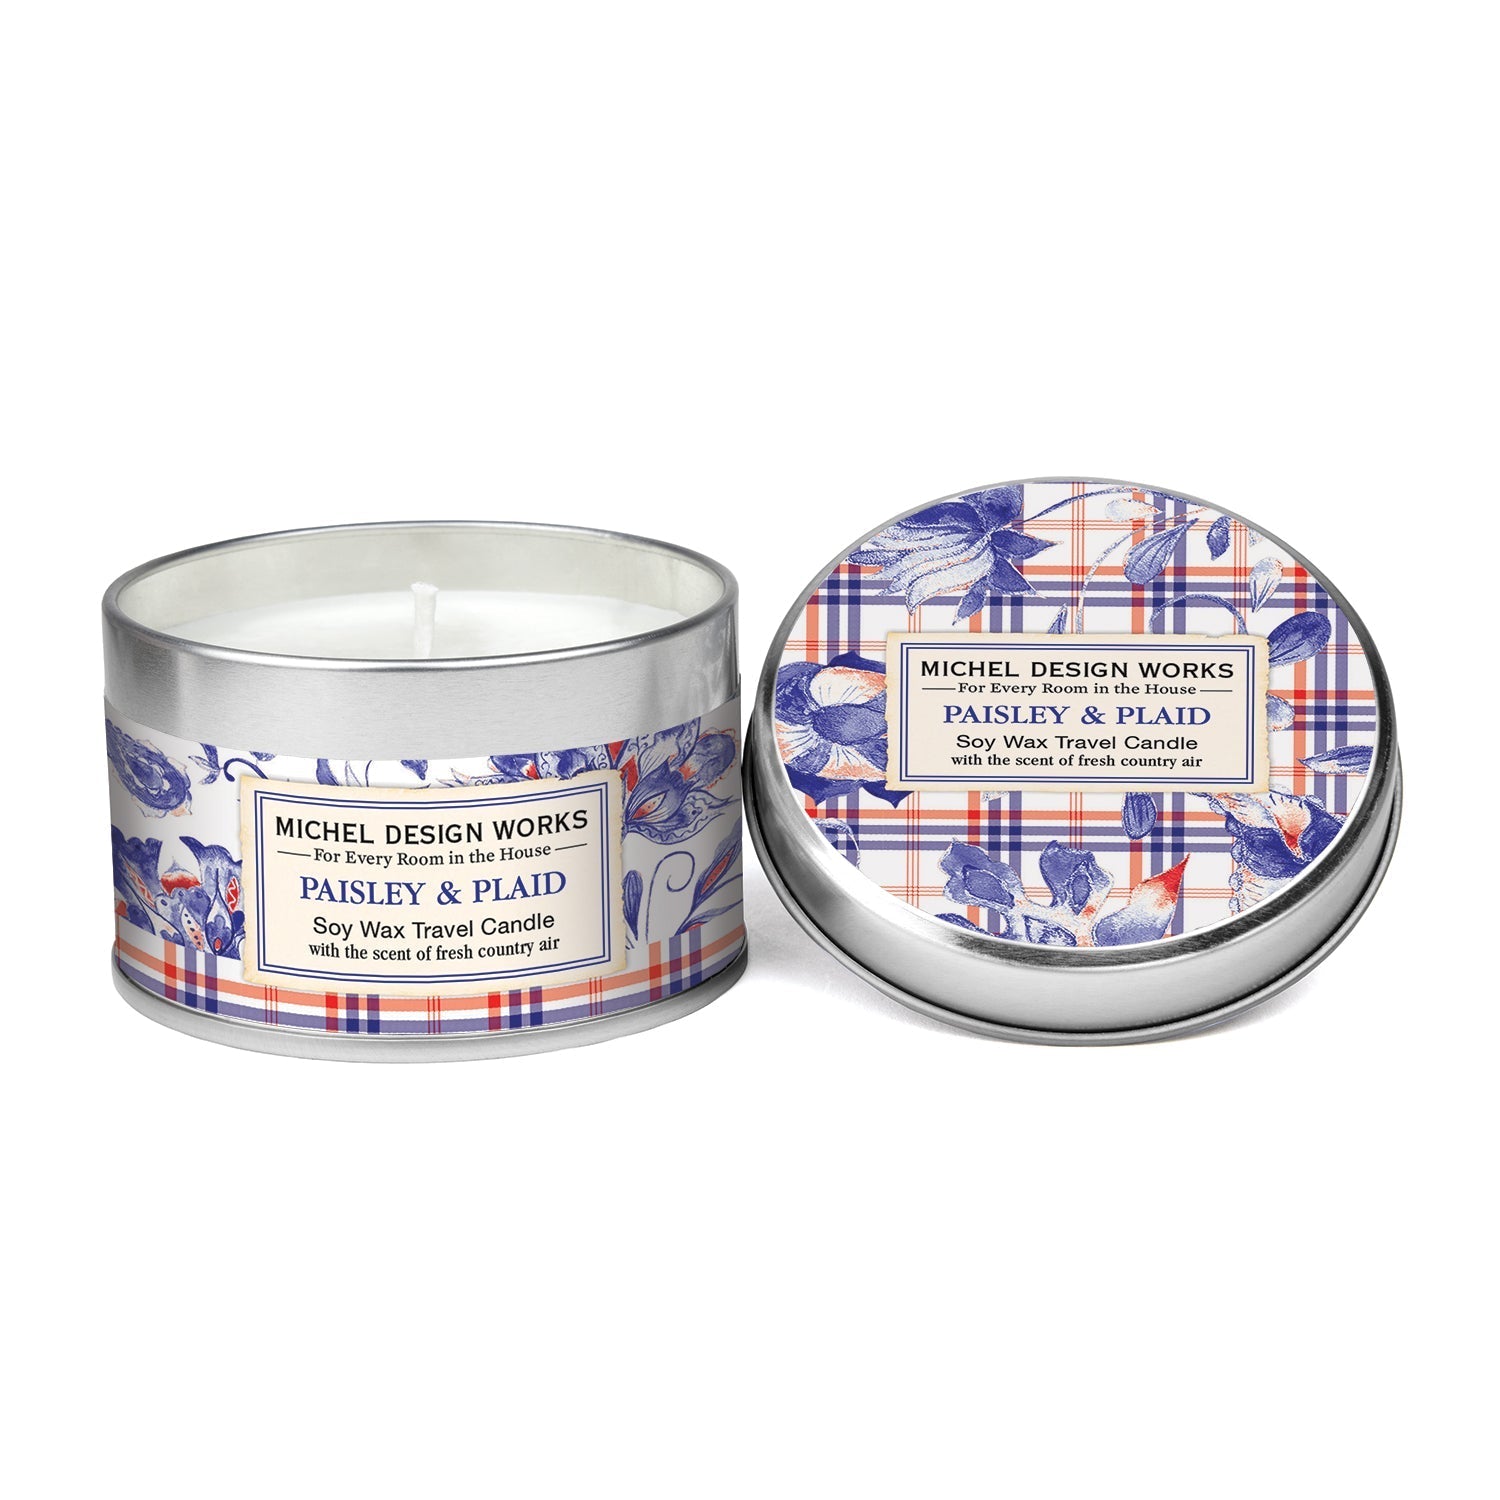 Paisley & Plaid - Soy Wax Travel Candle    